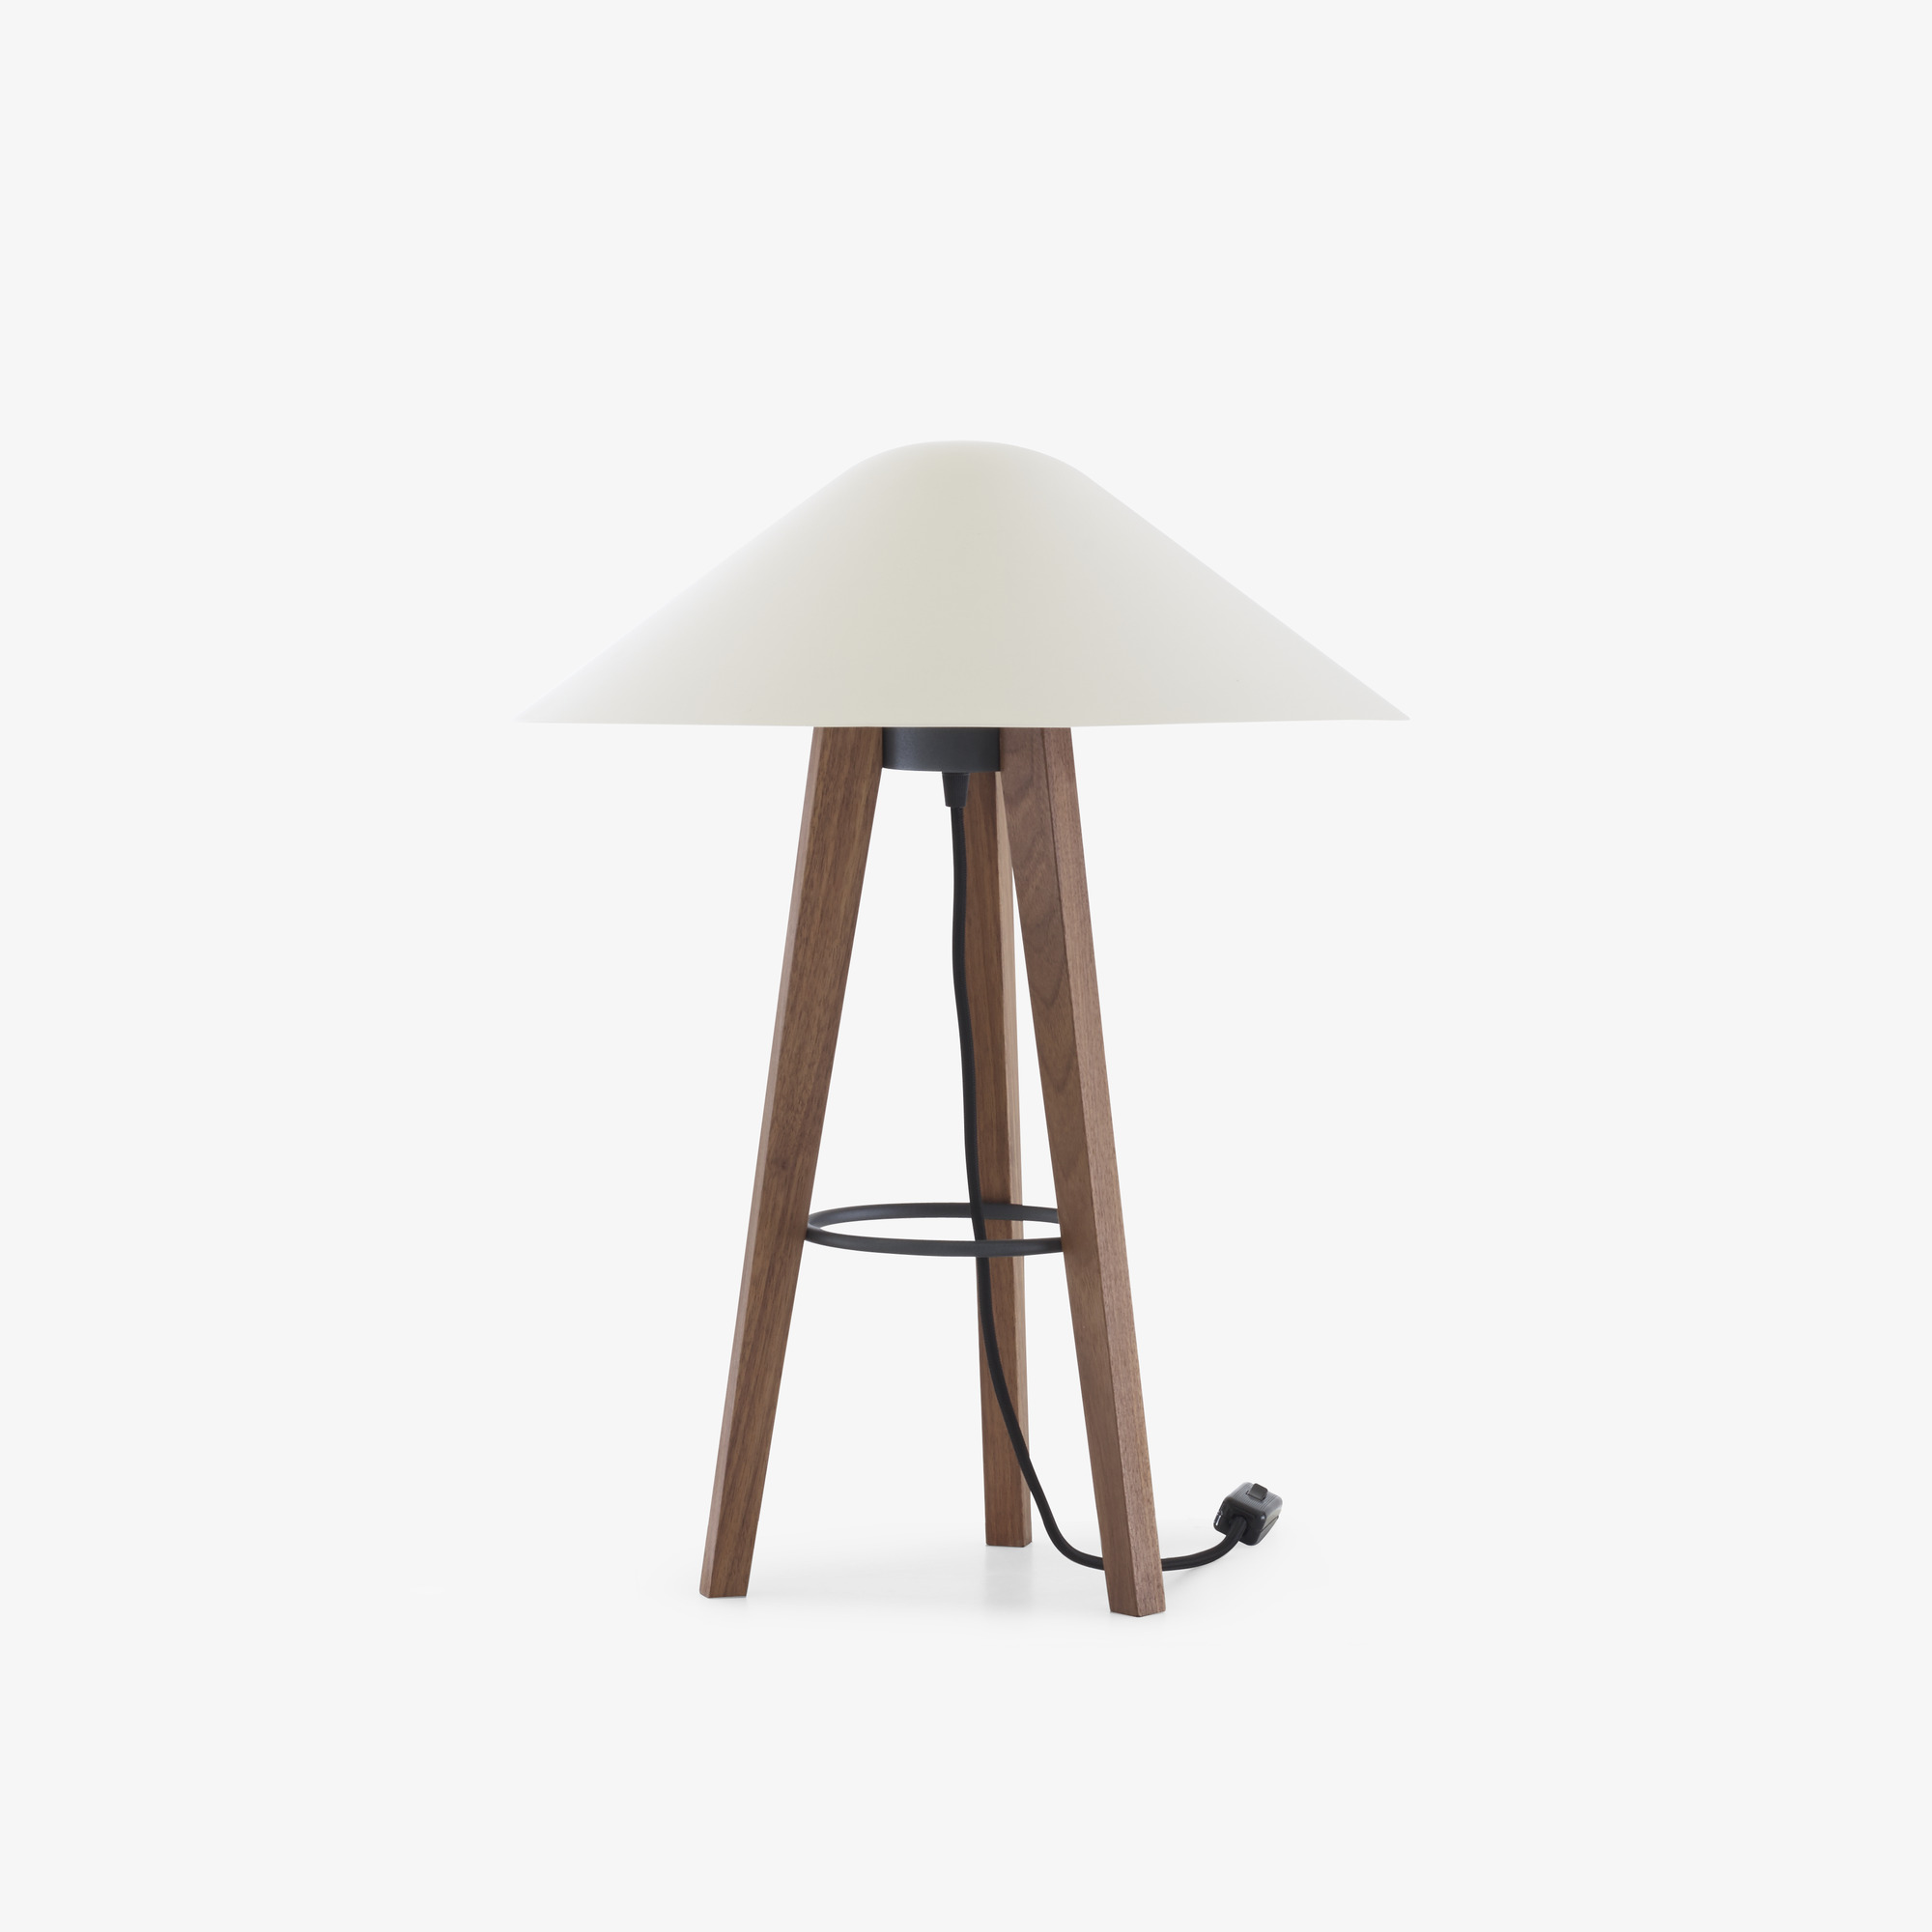 Image TABLE LAMP